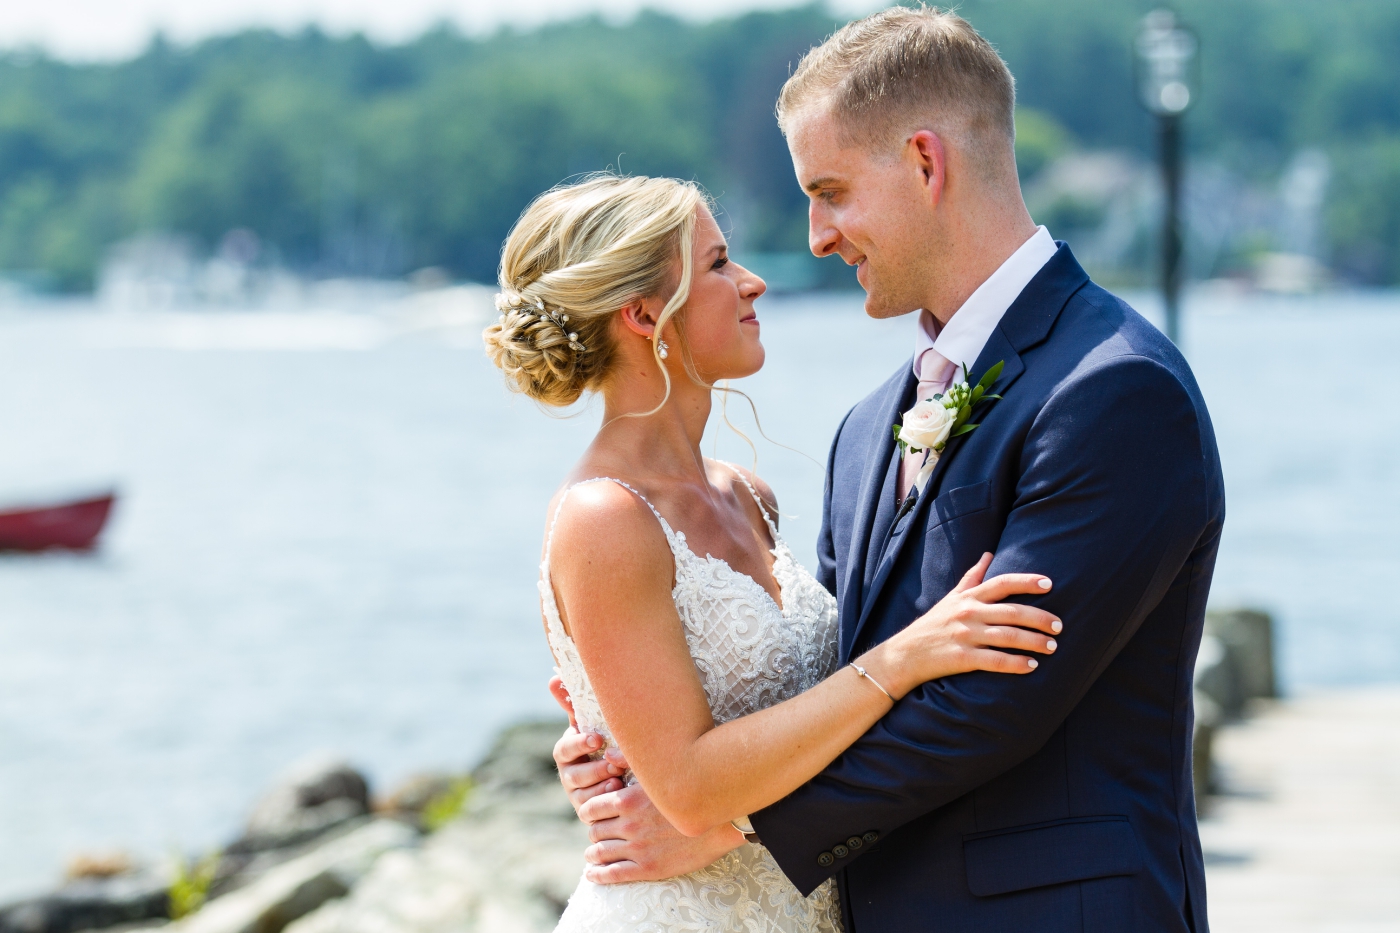 Bride and groom portraits at Brewster Academy